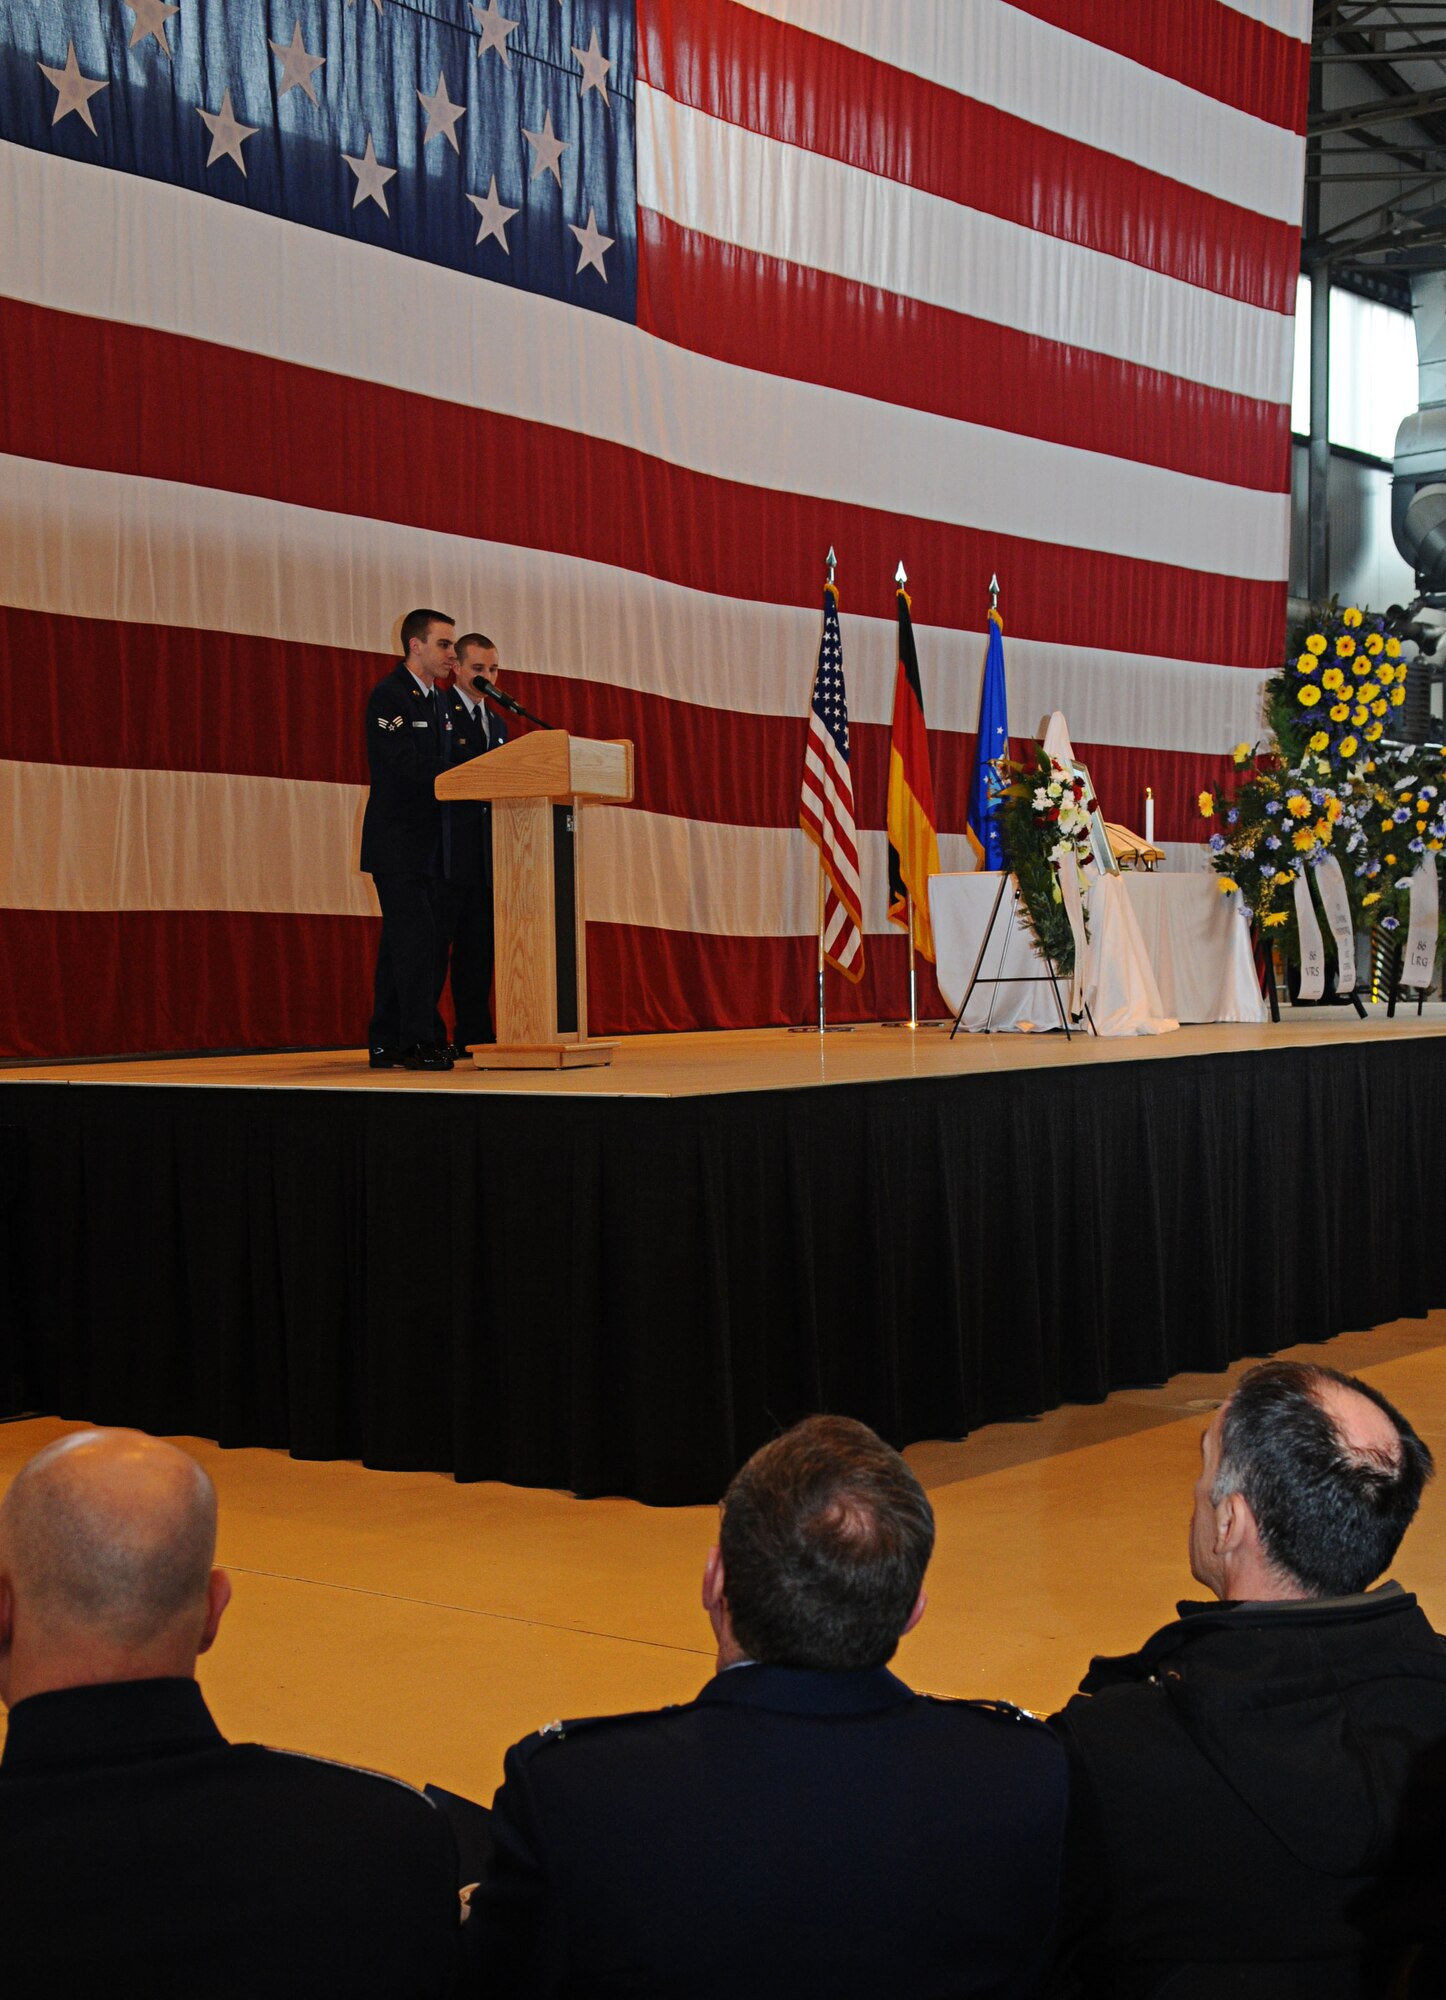 U.S. Air Force Senior Airman Bradley Opfar and Airman 1st Class Caleb Crickette, 86th Vehicle Readiness Squadron, pay tribute during the memorial service for Airman 1st Class Zachary Cuddeback, 86th Vehicle Readiness Squadron, Ramstein Air Base, Germany, March 10, 2011. Airman Cuddeback was killed in action at Frankfurt International Airport March 2, 2011. (U.S. Air Force photo by Airman 1st Class Desiree Whitney Esposito)